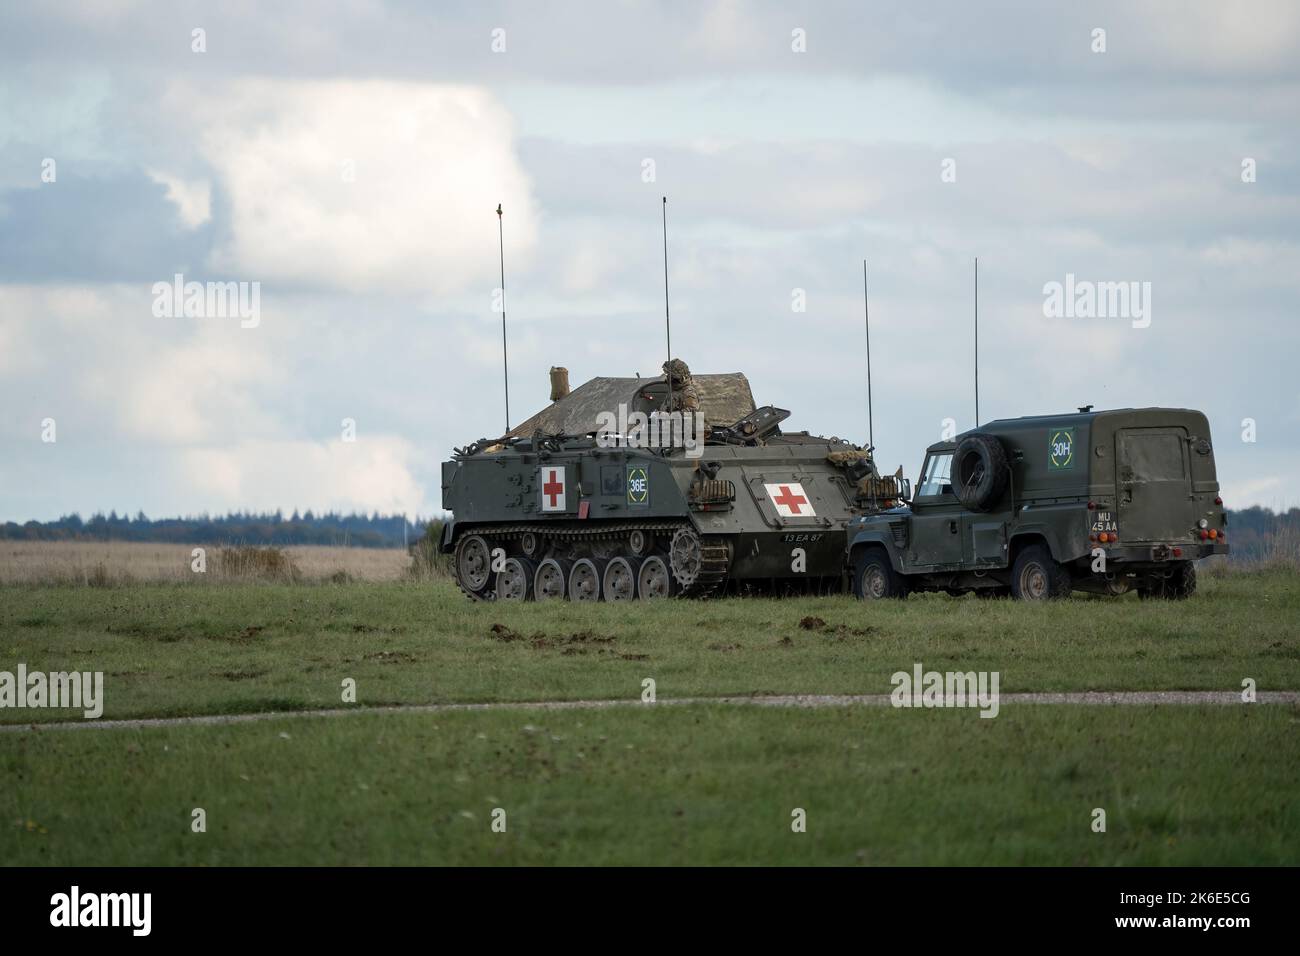 British army FV432 Bulldog medical ambulance armoured personnel carrier on a military exercise Wiltshire UK Stock Photo